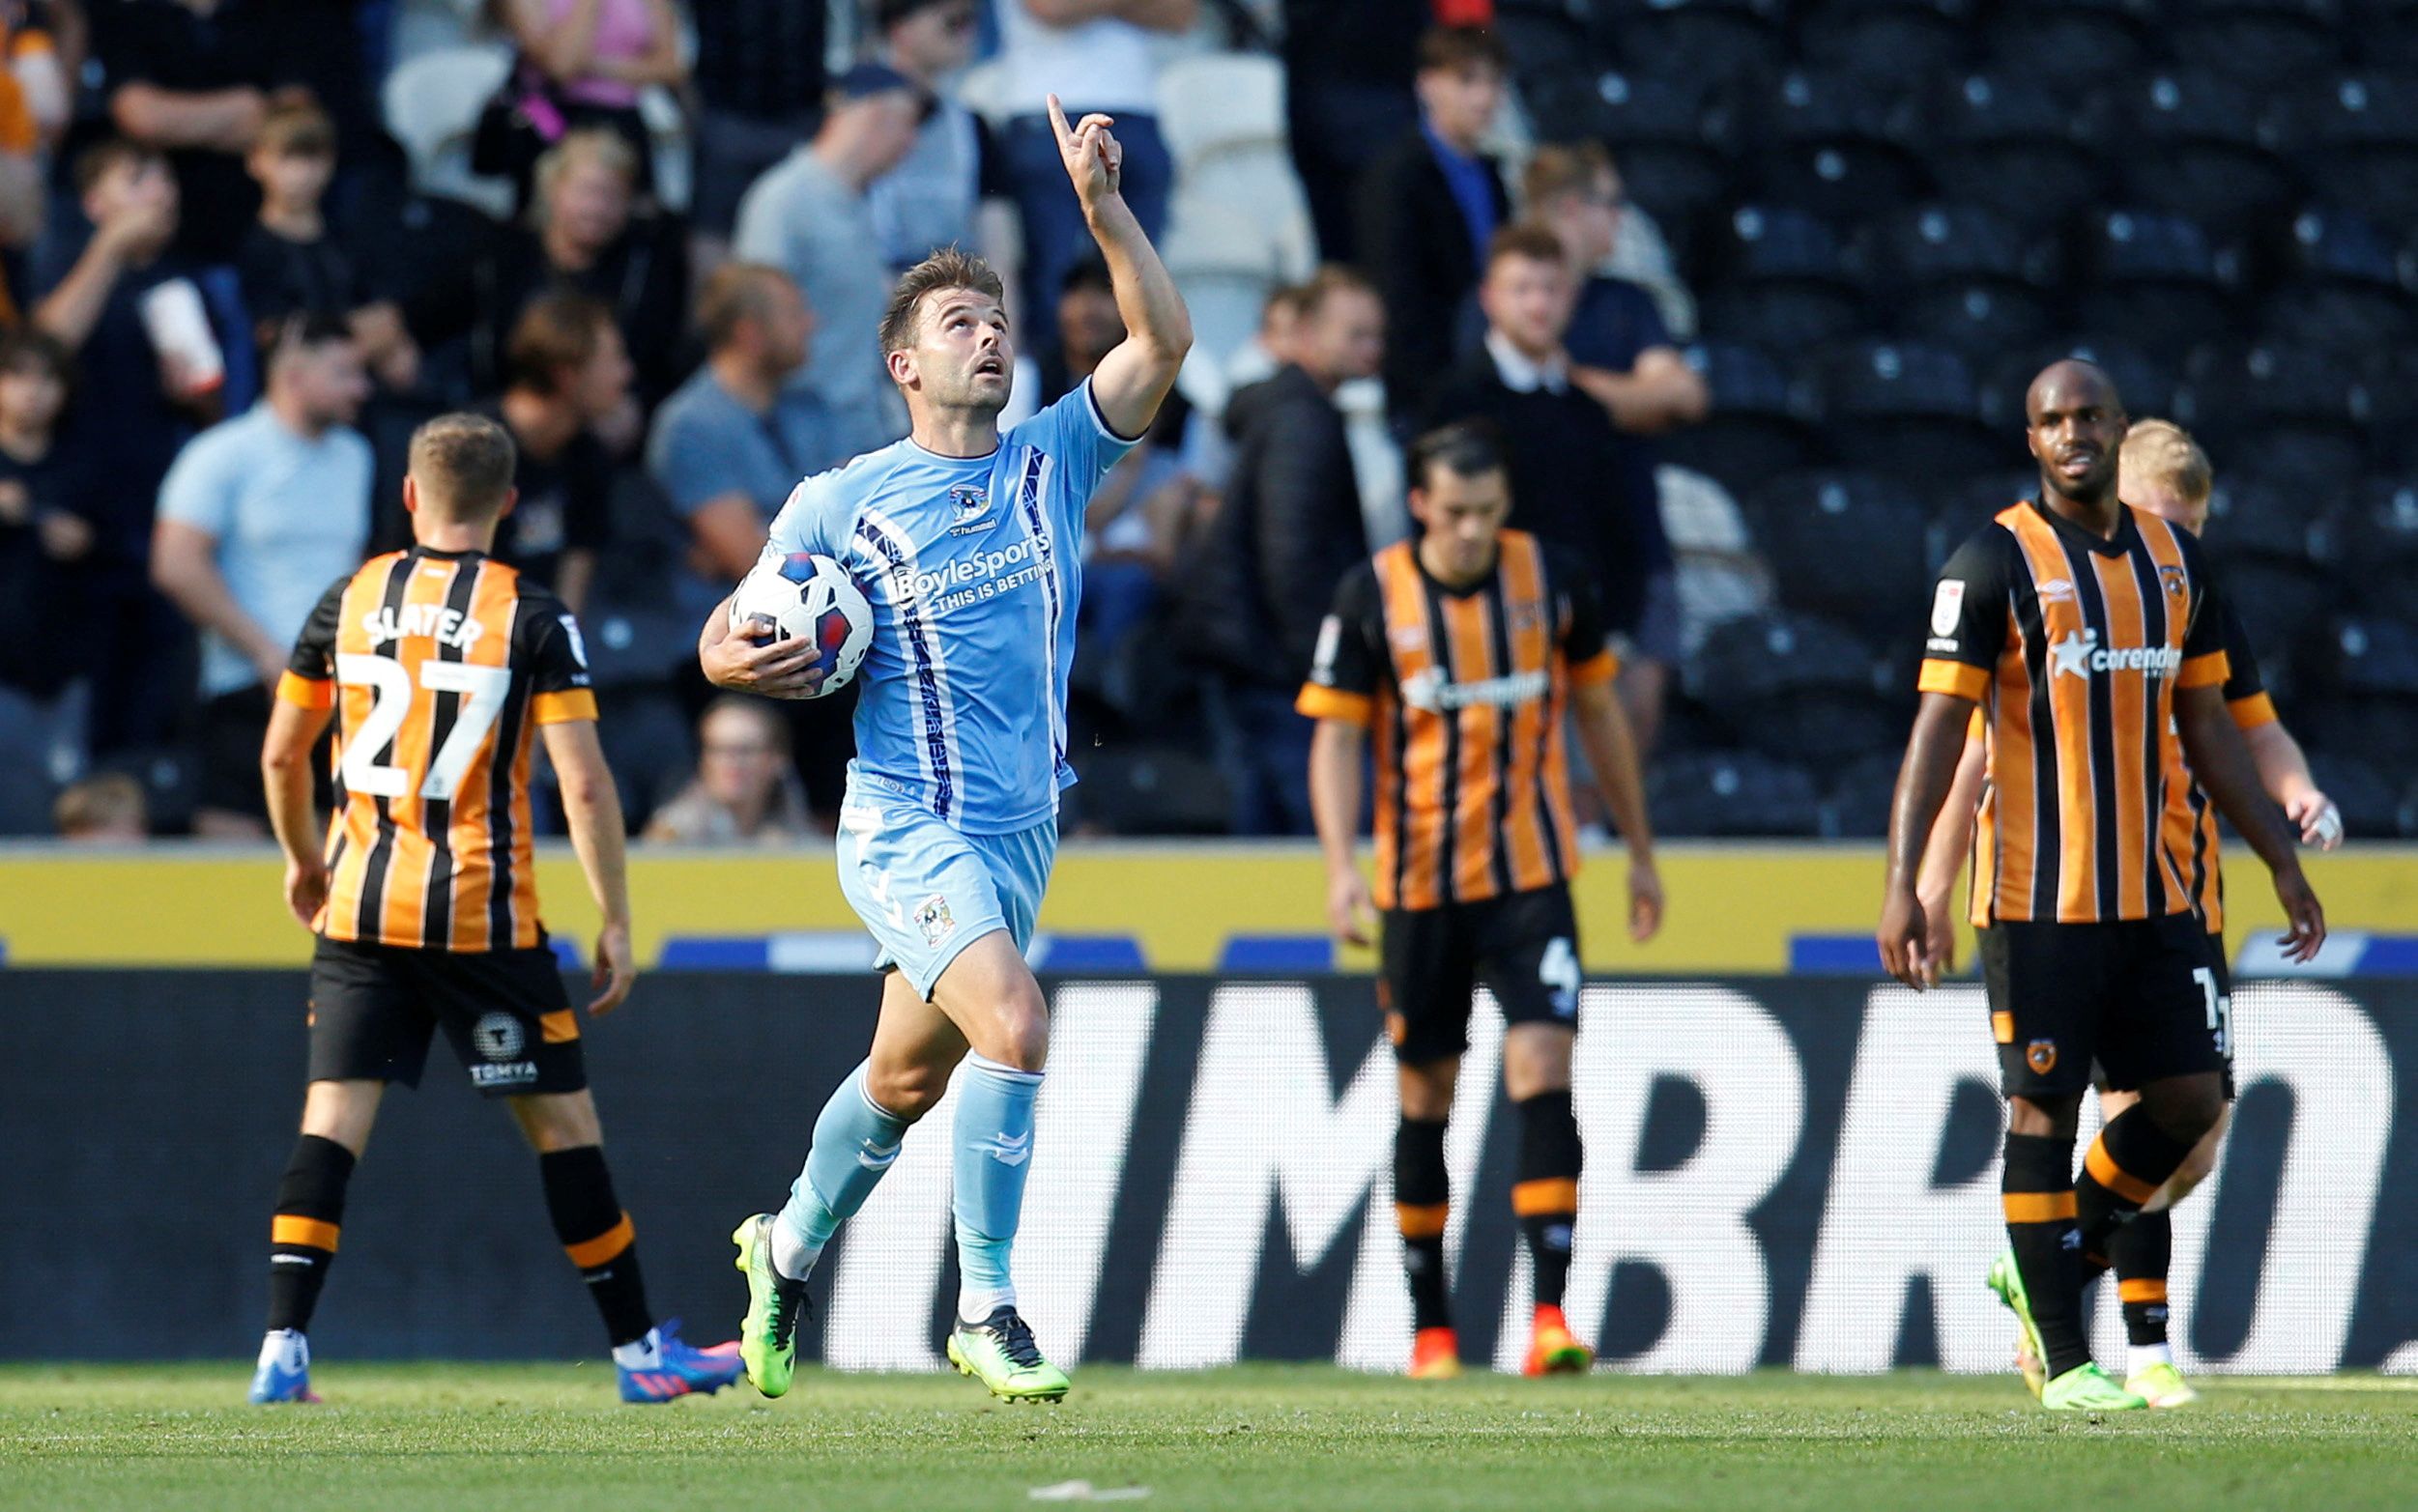 Soccer Football - Championship - Hull City v Coventry City - MKM Stadium, Hull, Britain - August 27, 2022 Coventry City's Matty Godden celebrates scoring their second goal Action Images/Ed Sykes EDITORIAL USE ONLY. No use with unauthorized audio, video, data, fixture lists, club/league logos or 